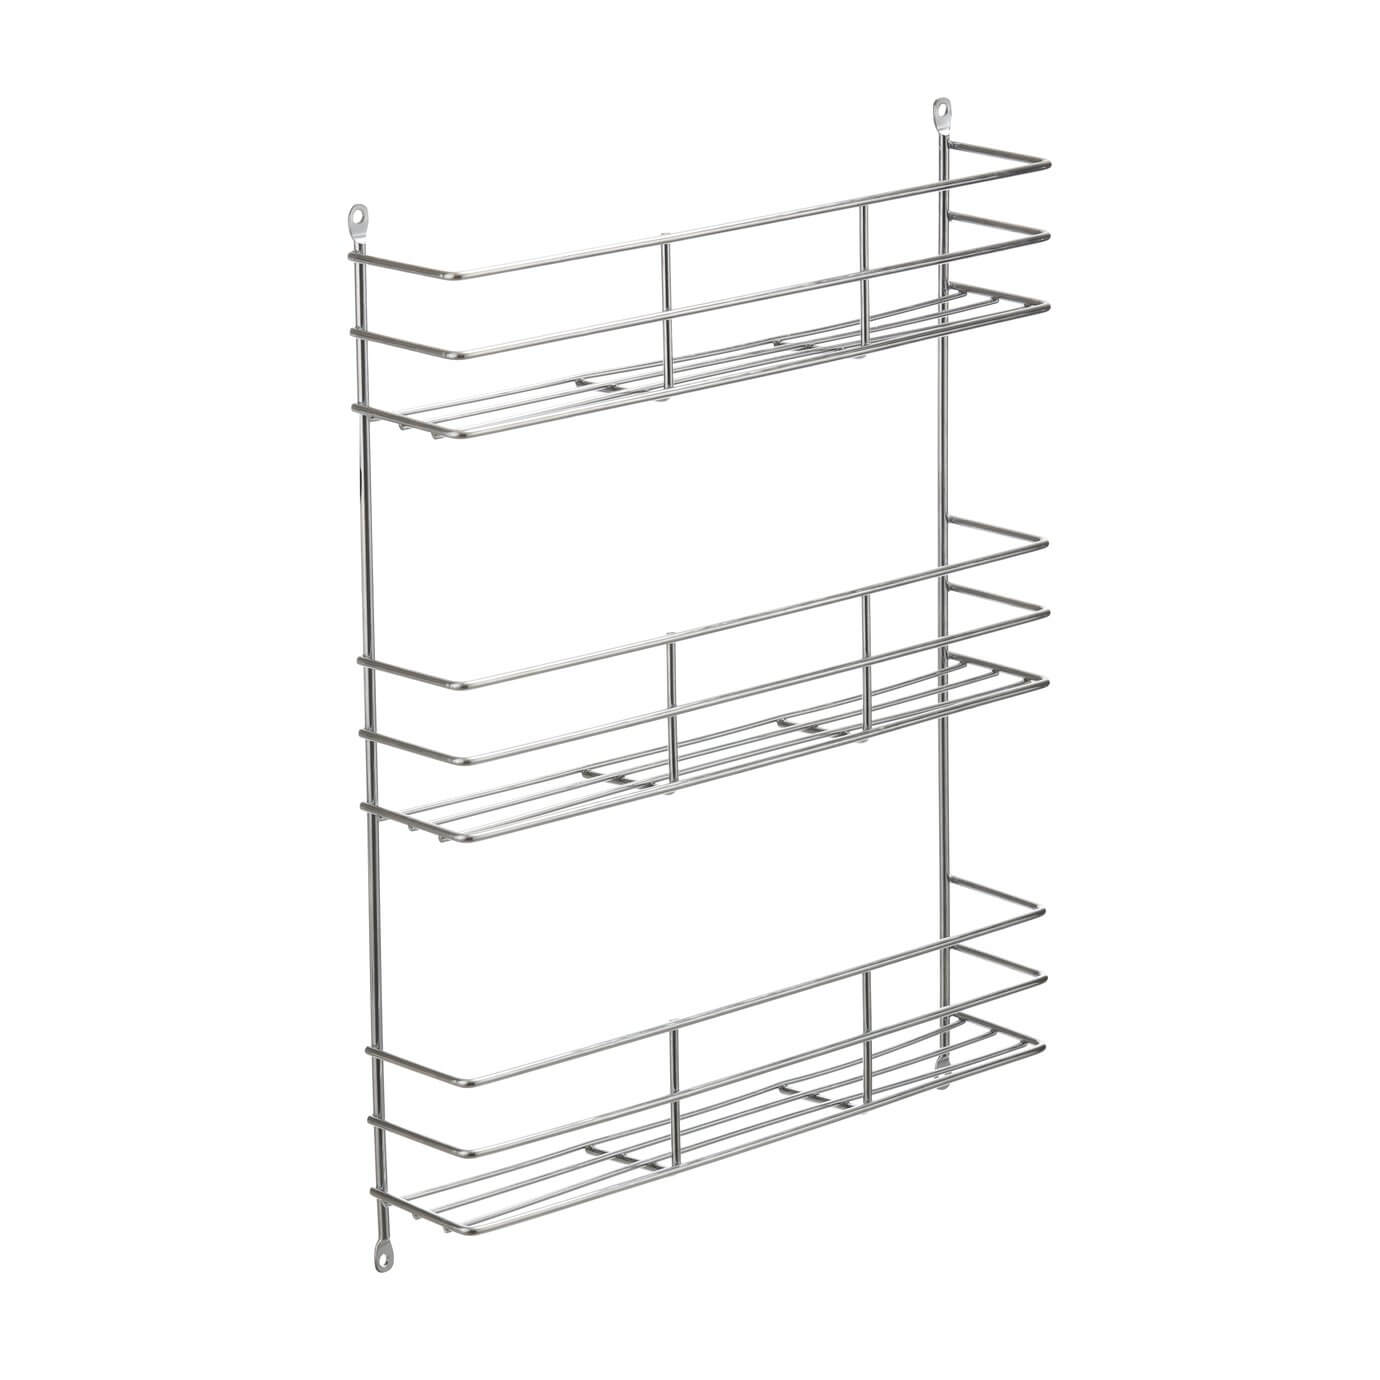 3 Tier Wall Mounted Spice Rack Chrome - KITCHEN - Spice Racks - Soko and Co